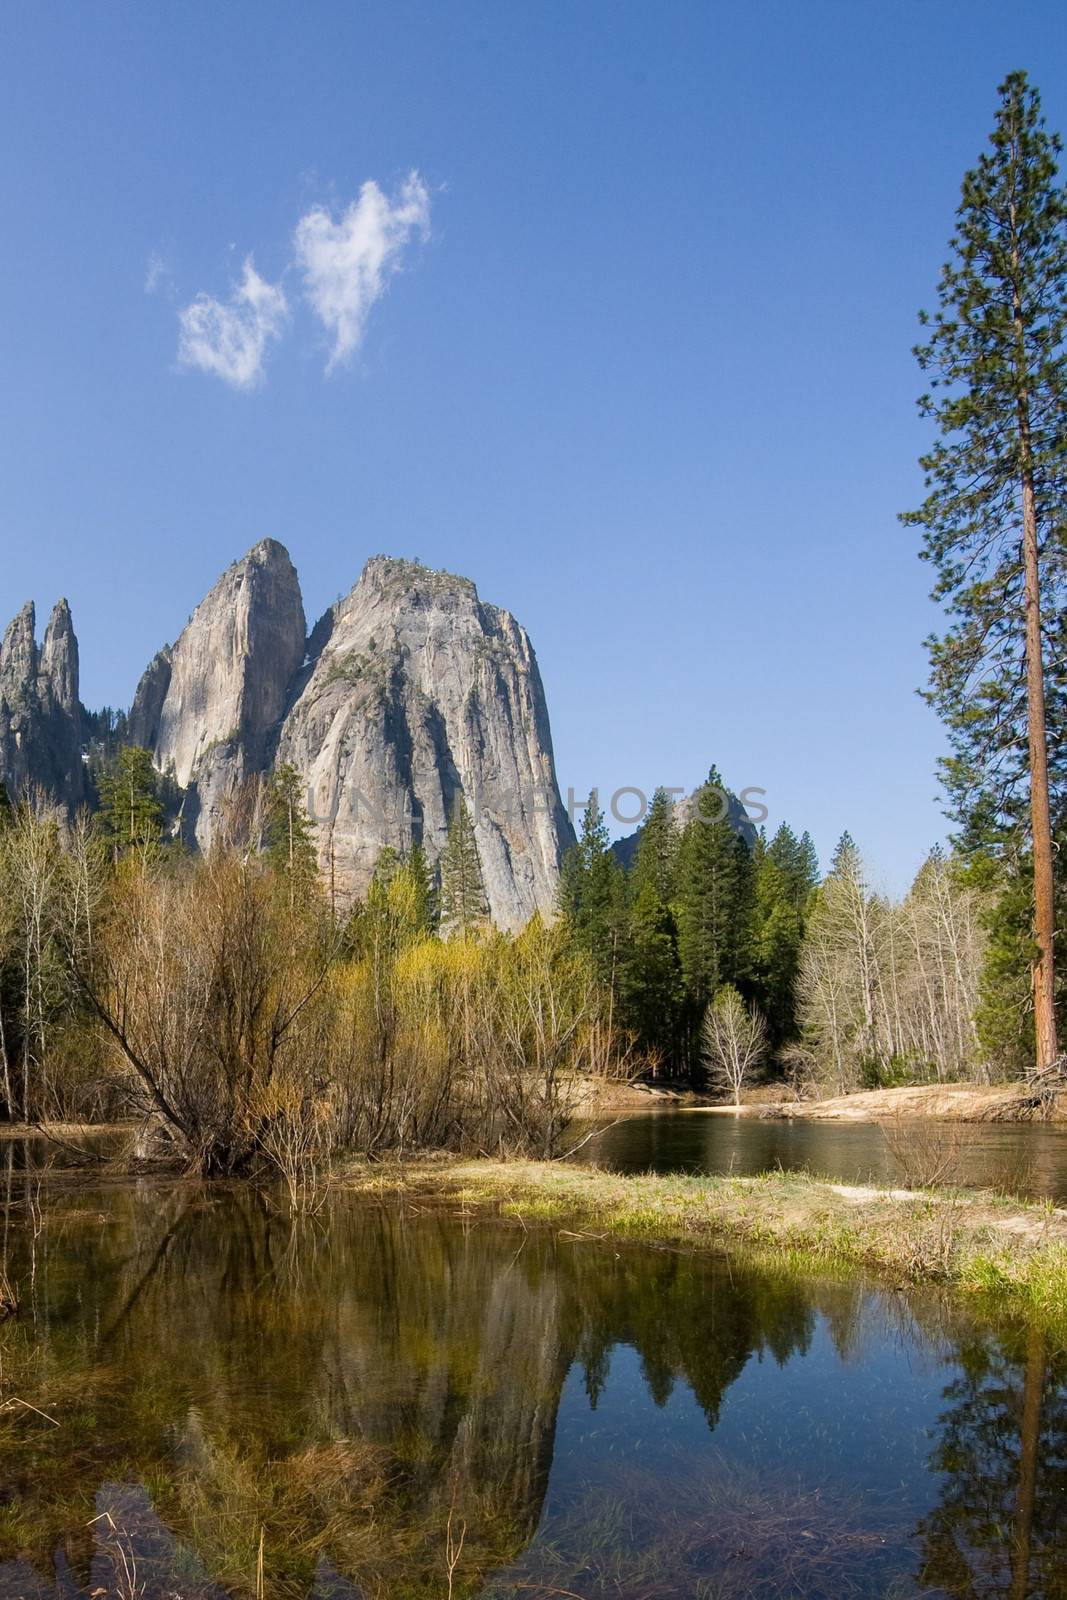 Scenic view of mountains and lake in Yosemite National Park, California, U.S.A.